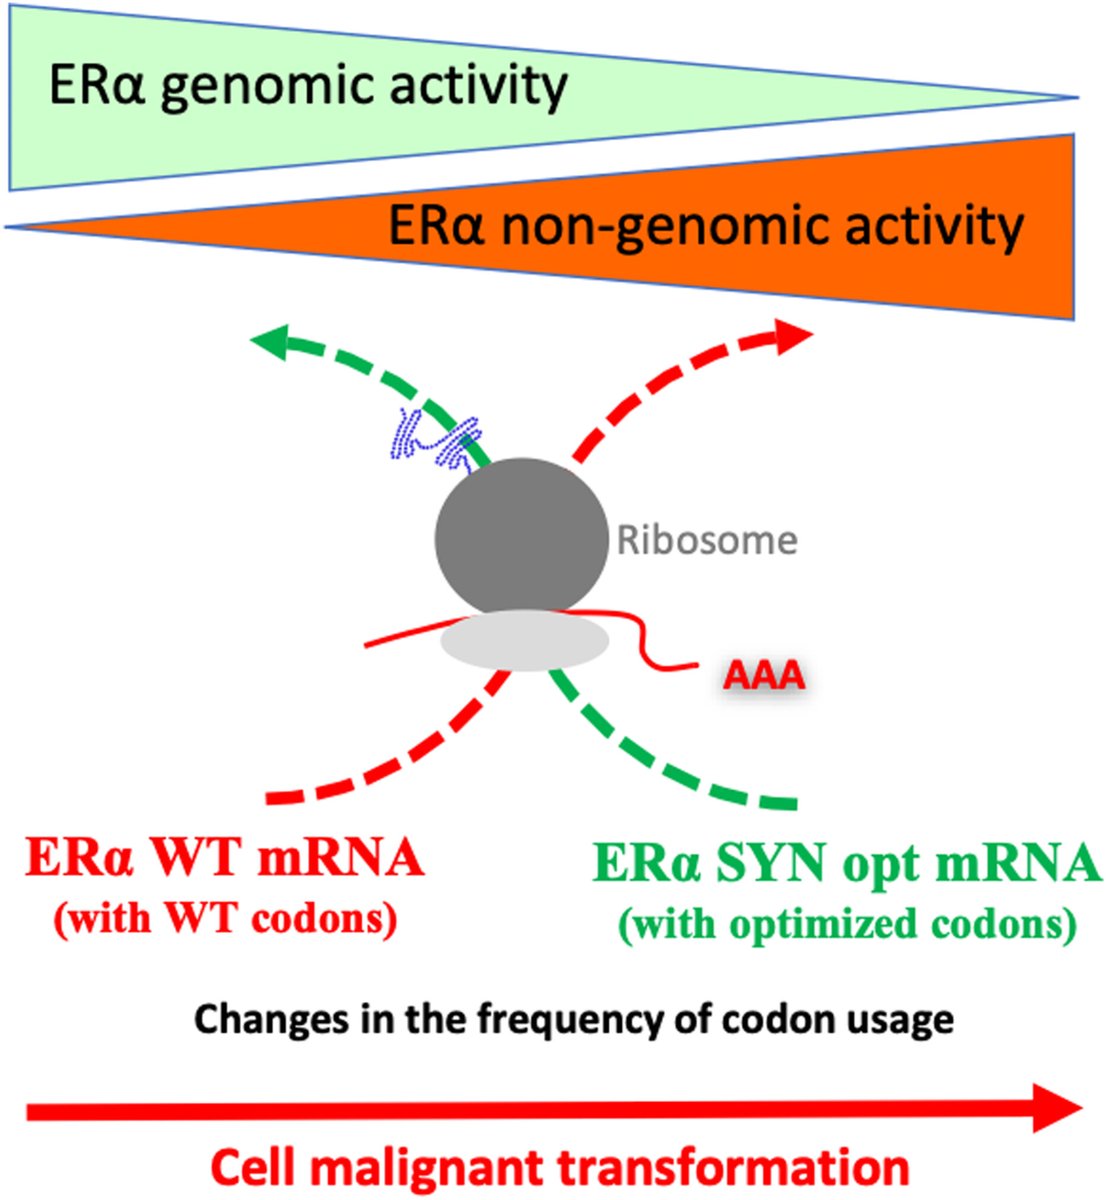 💫Codon adaptation by synonymous mutations impacts the functional properties of the estrogen receptor-alpha protein in breast cancer cells

🔗buff.ly/43zddUq

#EvolBio #CancerResearch #EvoDevo #CancerEvolution #EstrogenReceptor